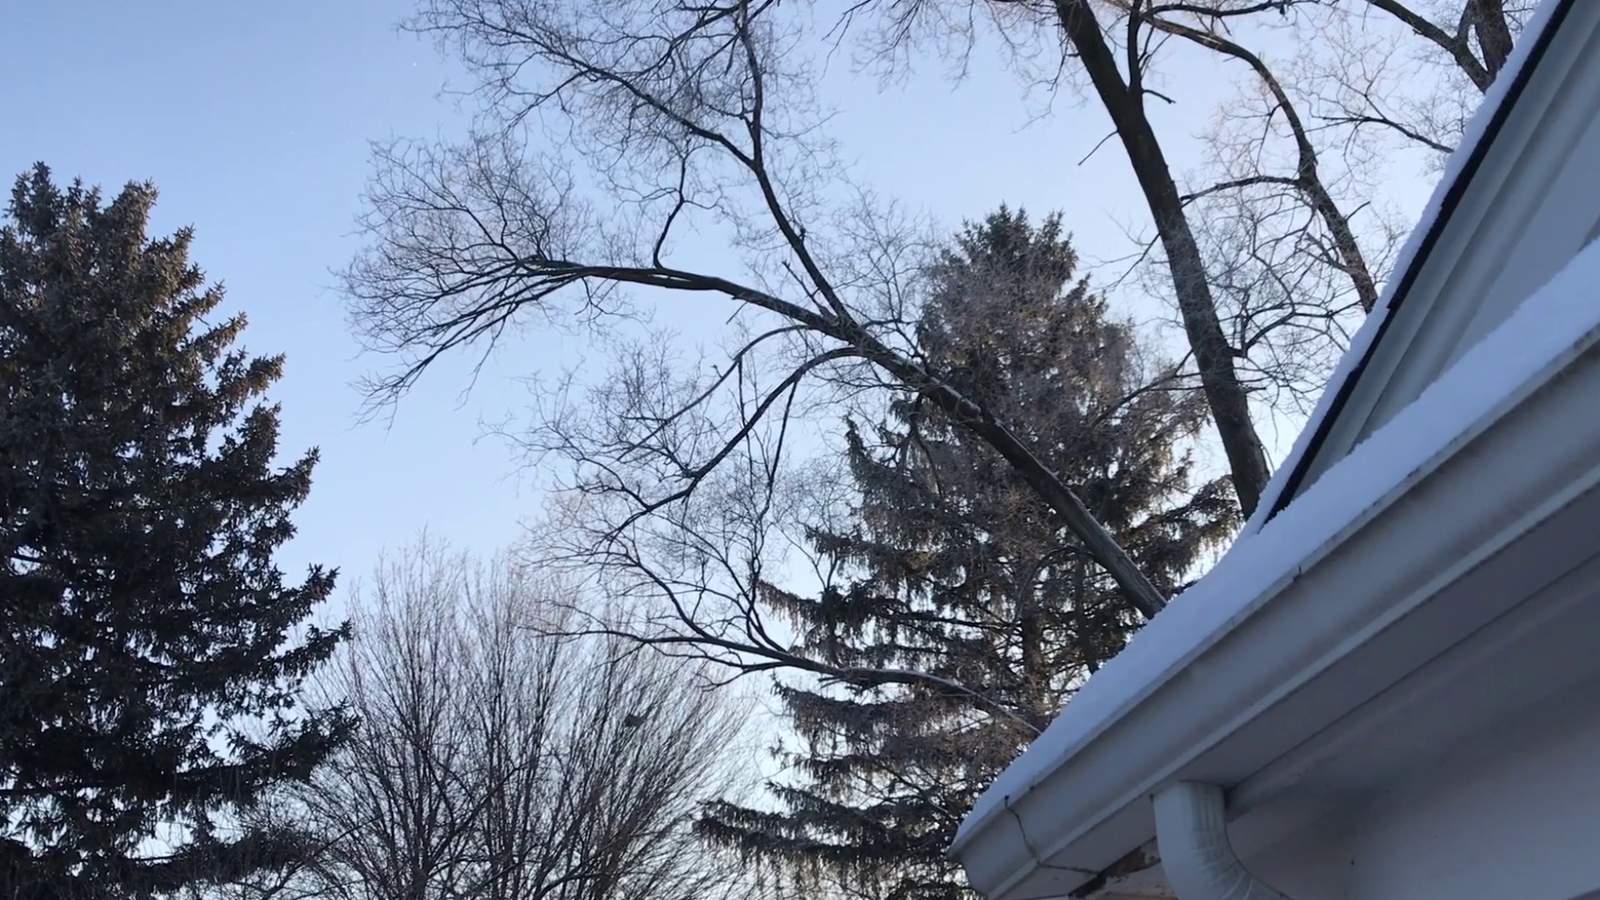 Snow falling from a clear blue sky in Michigan -- but how?